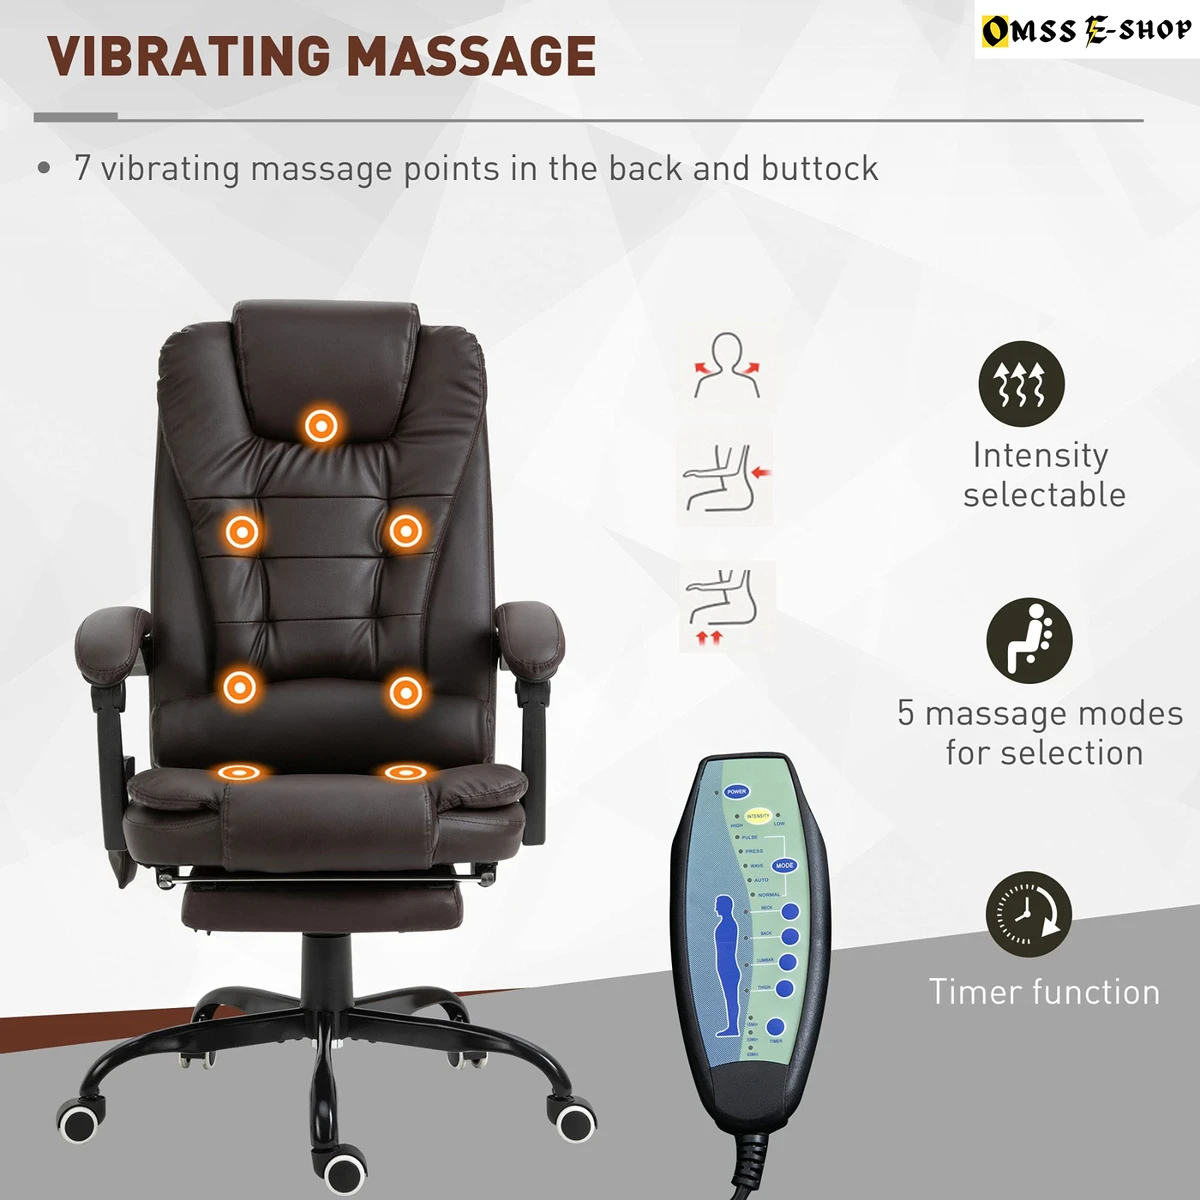 Vinsetto 7-Point Vibrating Massage Office Chair High Back Executive Recliner with Lumbar Support, Footrest, Reclining Back, Adjustable Height, Black